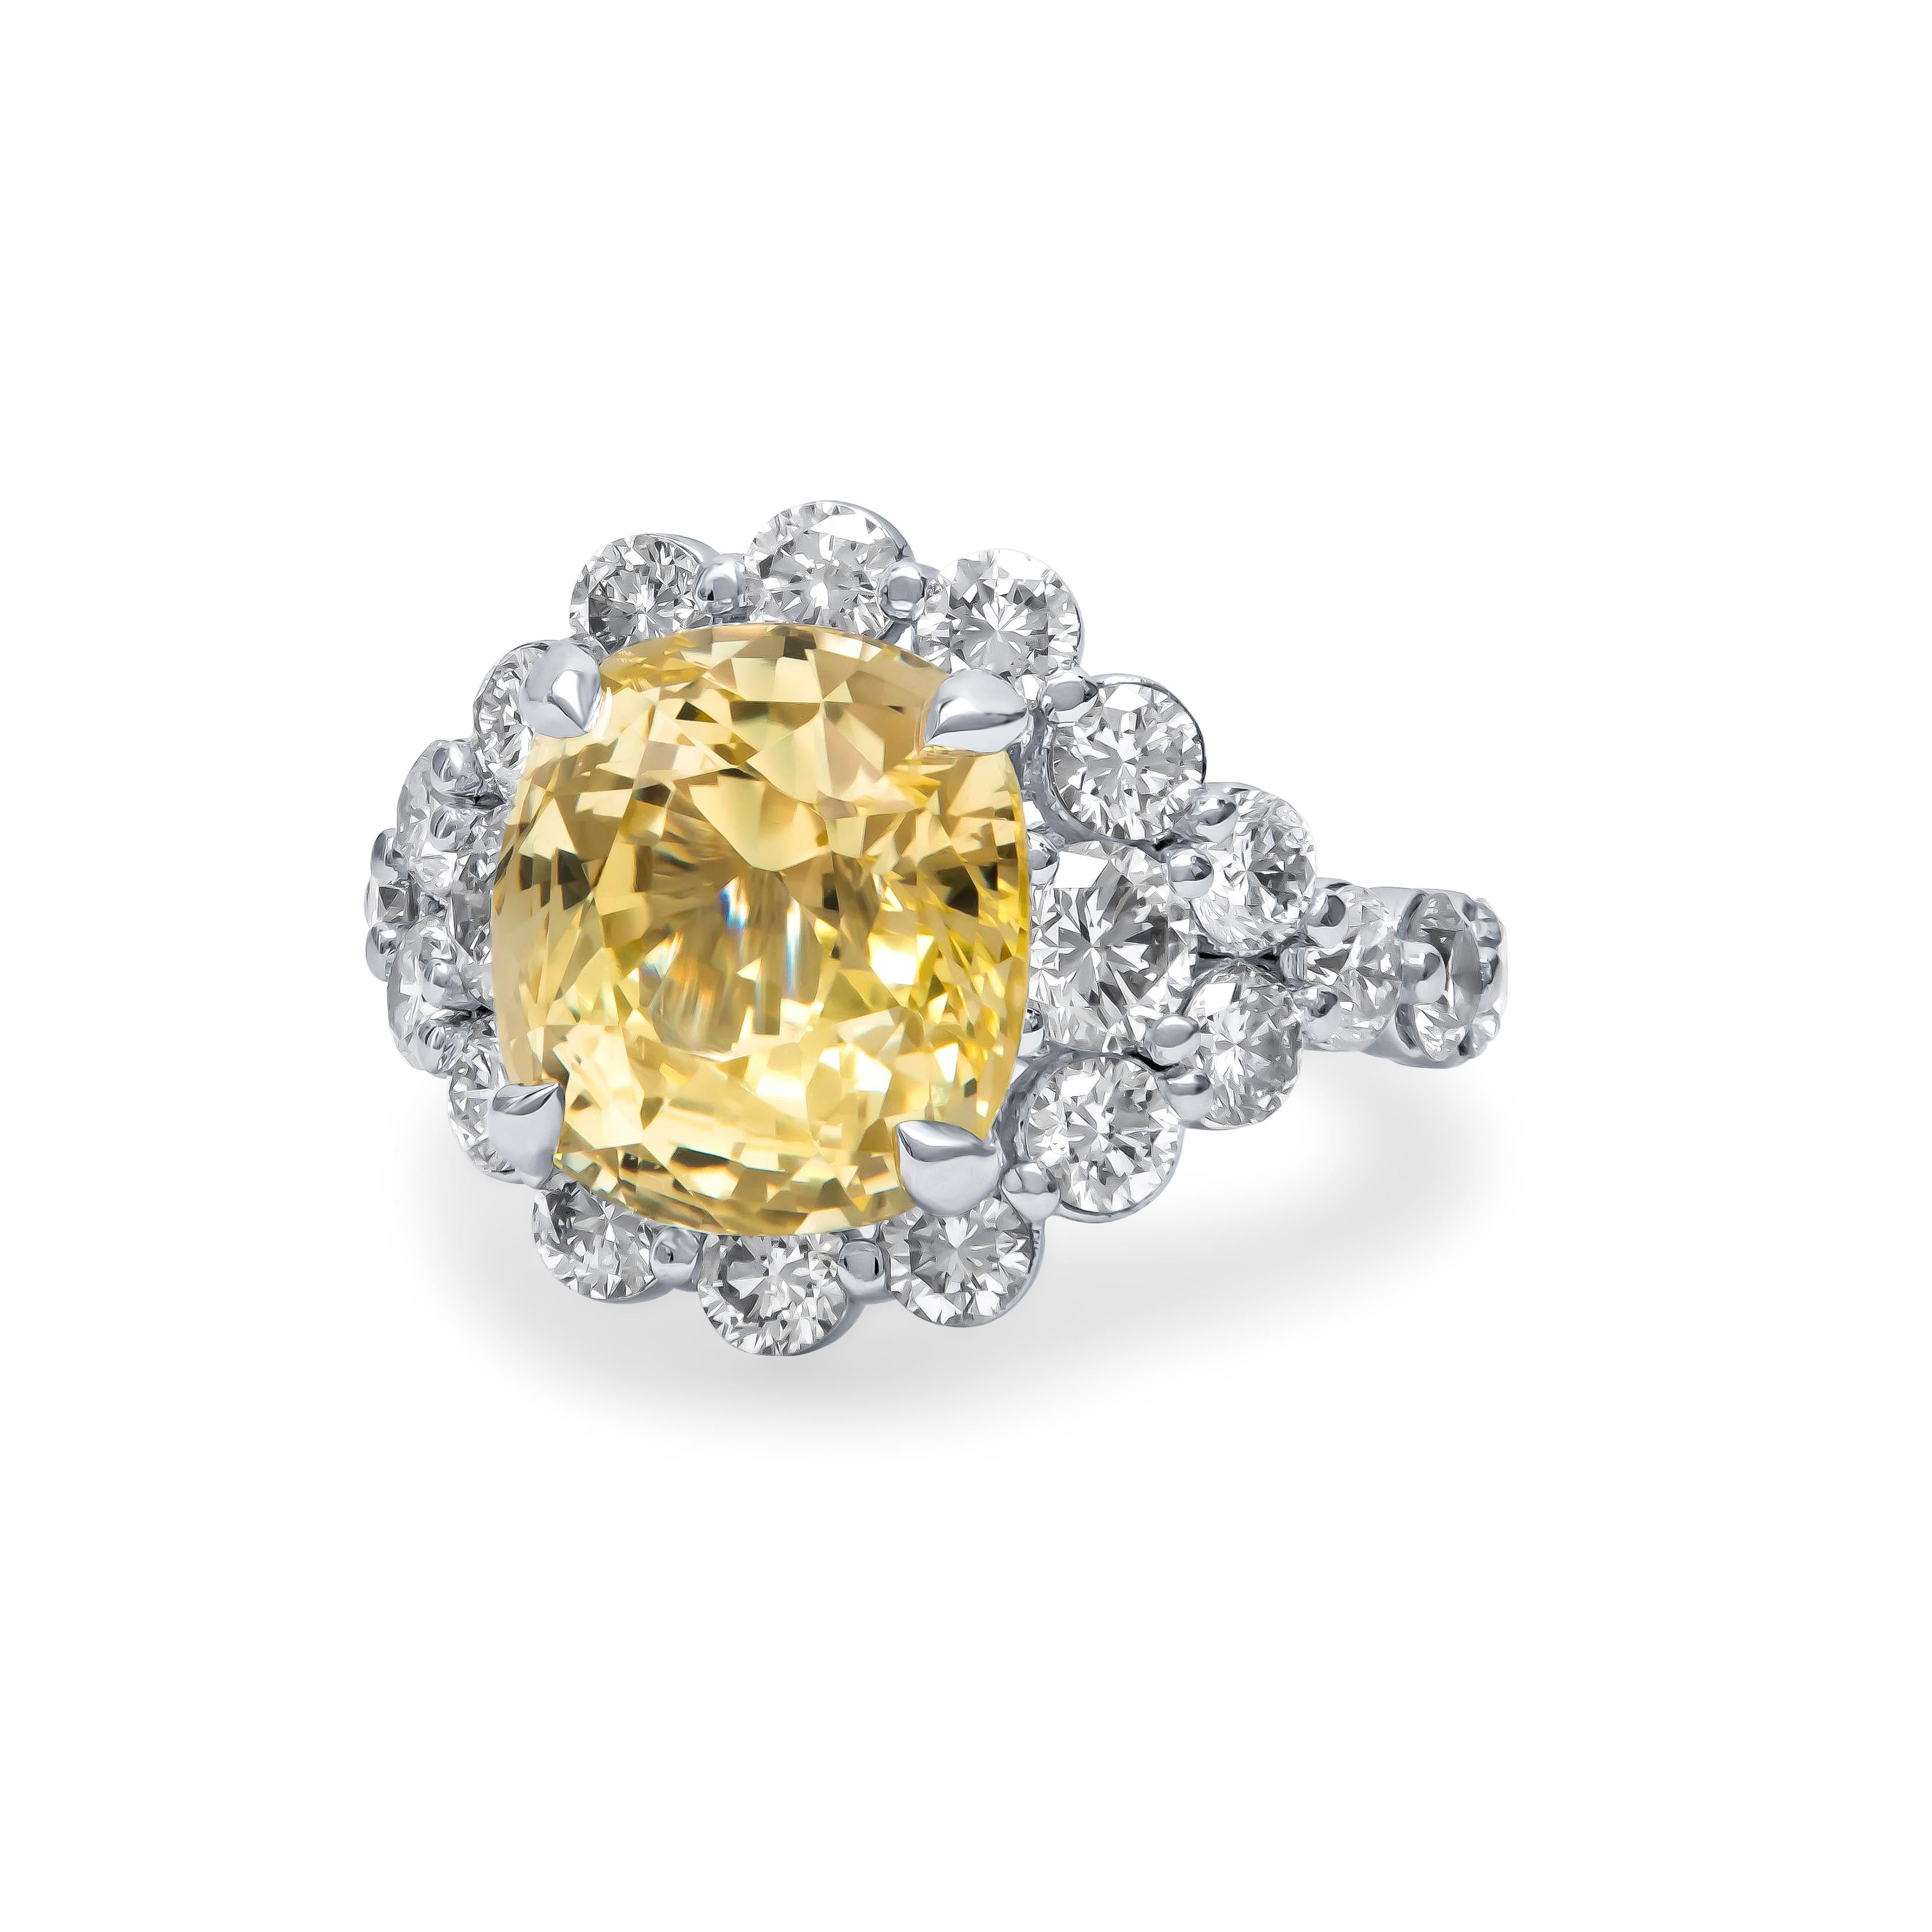 Beautifully hand-crafted 9.79 carat cushion cut natural Ceylon, no heat, yellow sapphire center stone that is set in a custom platinum setting. The stone is accompanied by approximately 3.40 carats total weight of fine round brilliant cut natural